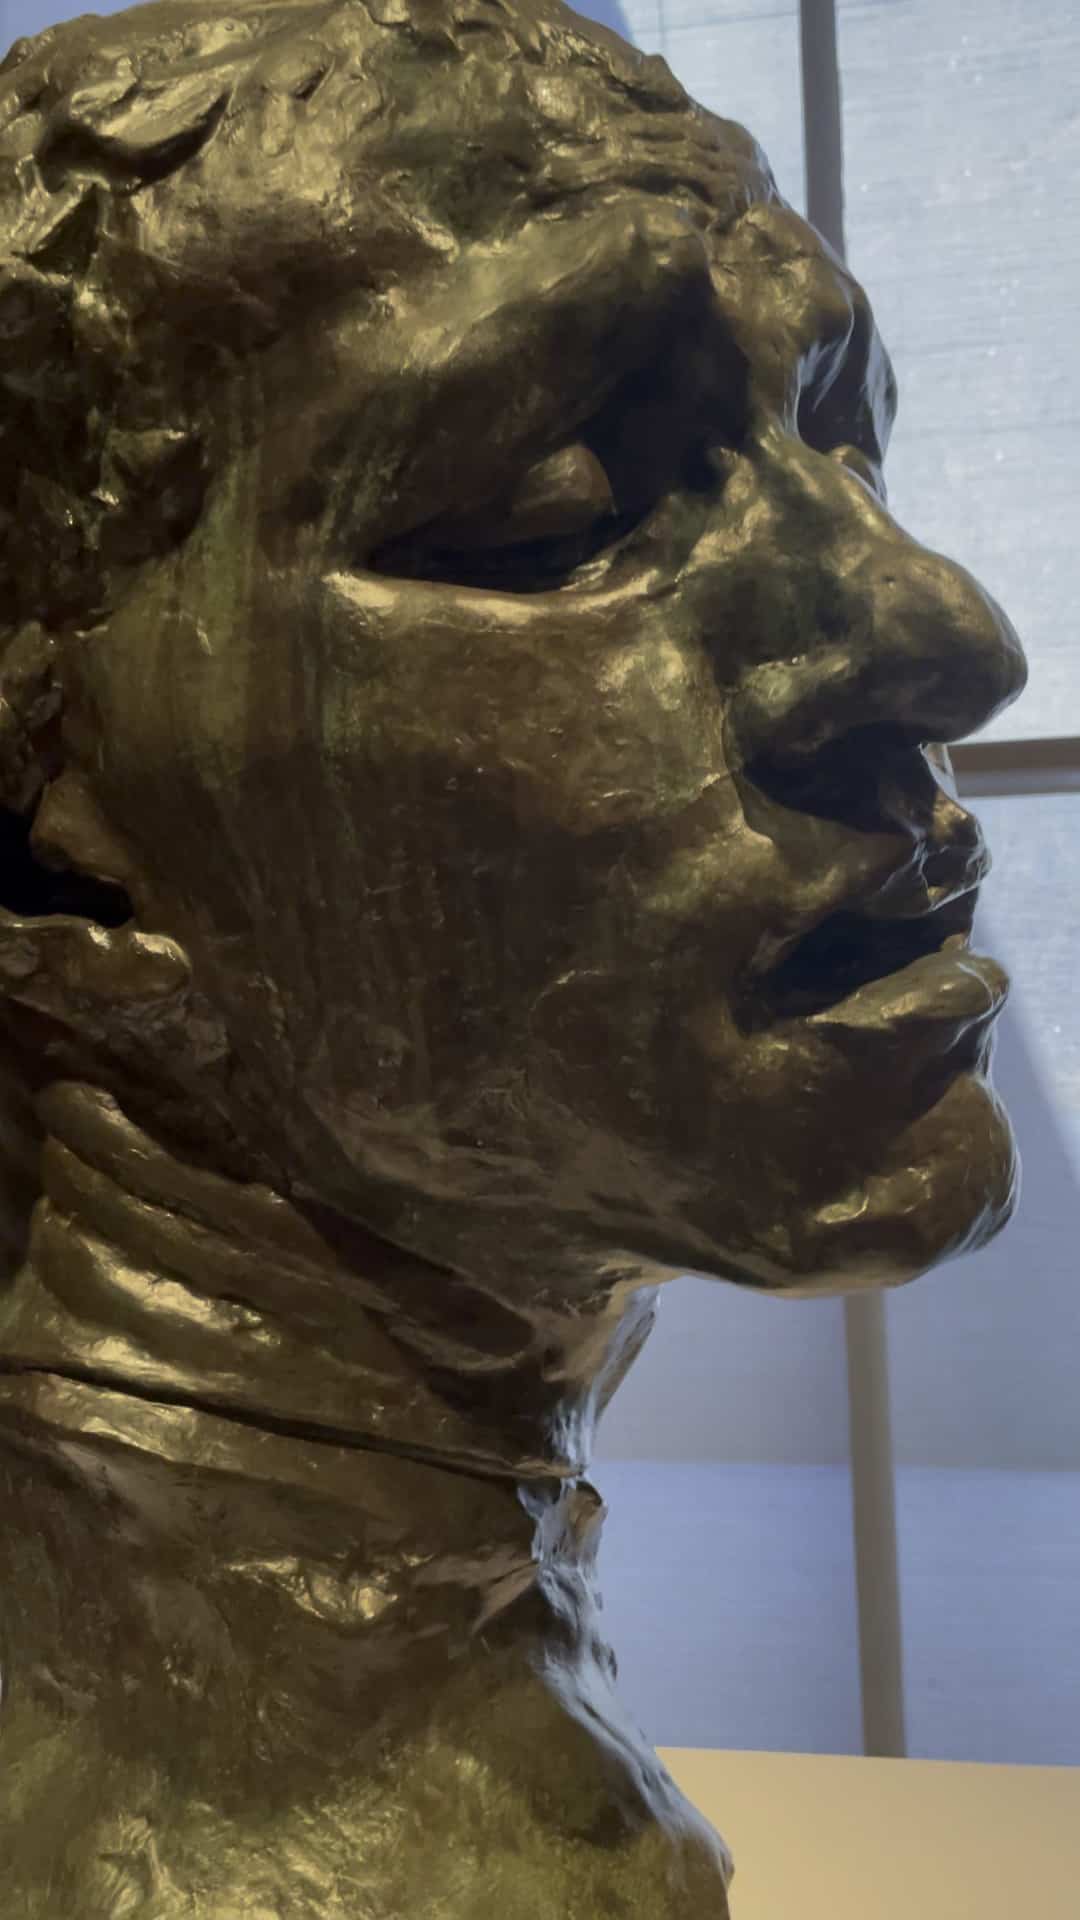 Rodin's bronze shows the heroic head of Pierre de Wissant, one of the Burghers of Calais.